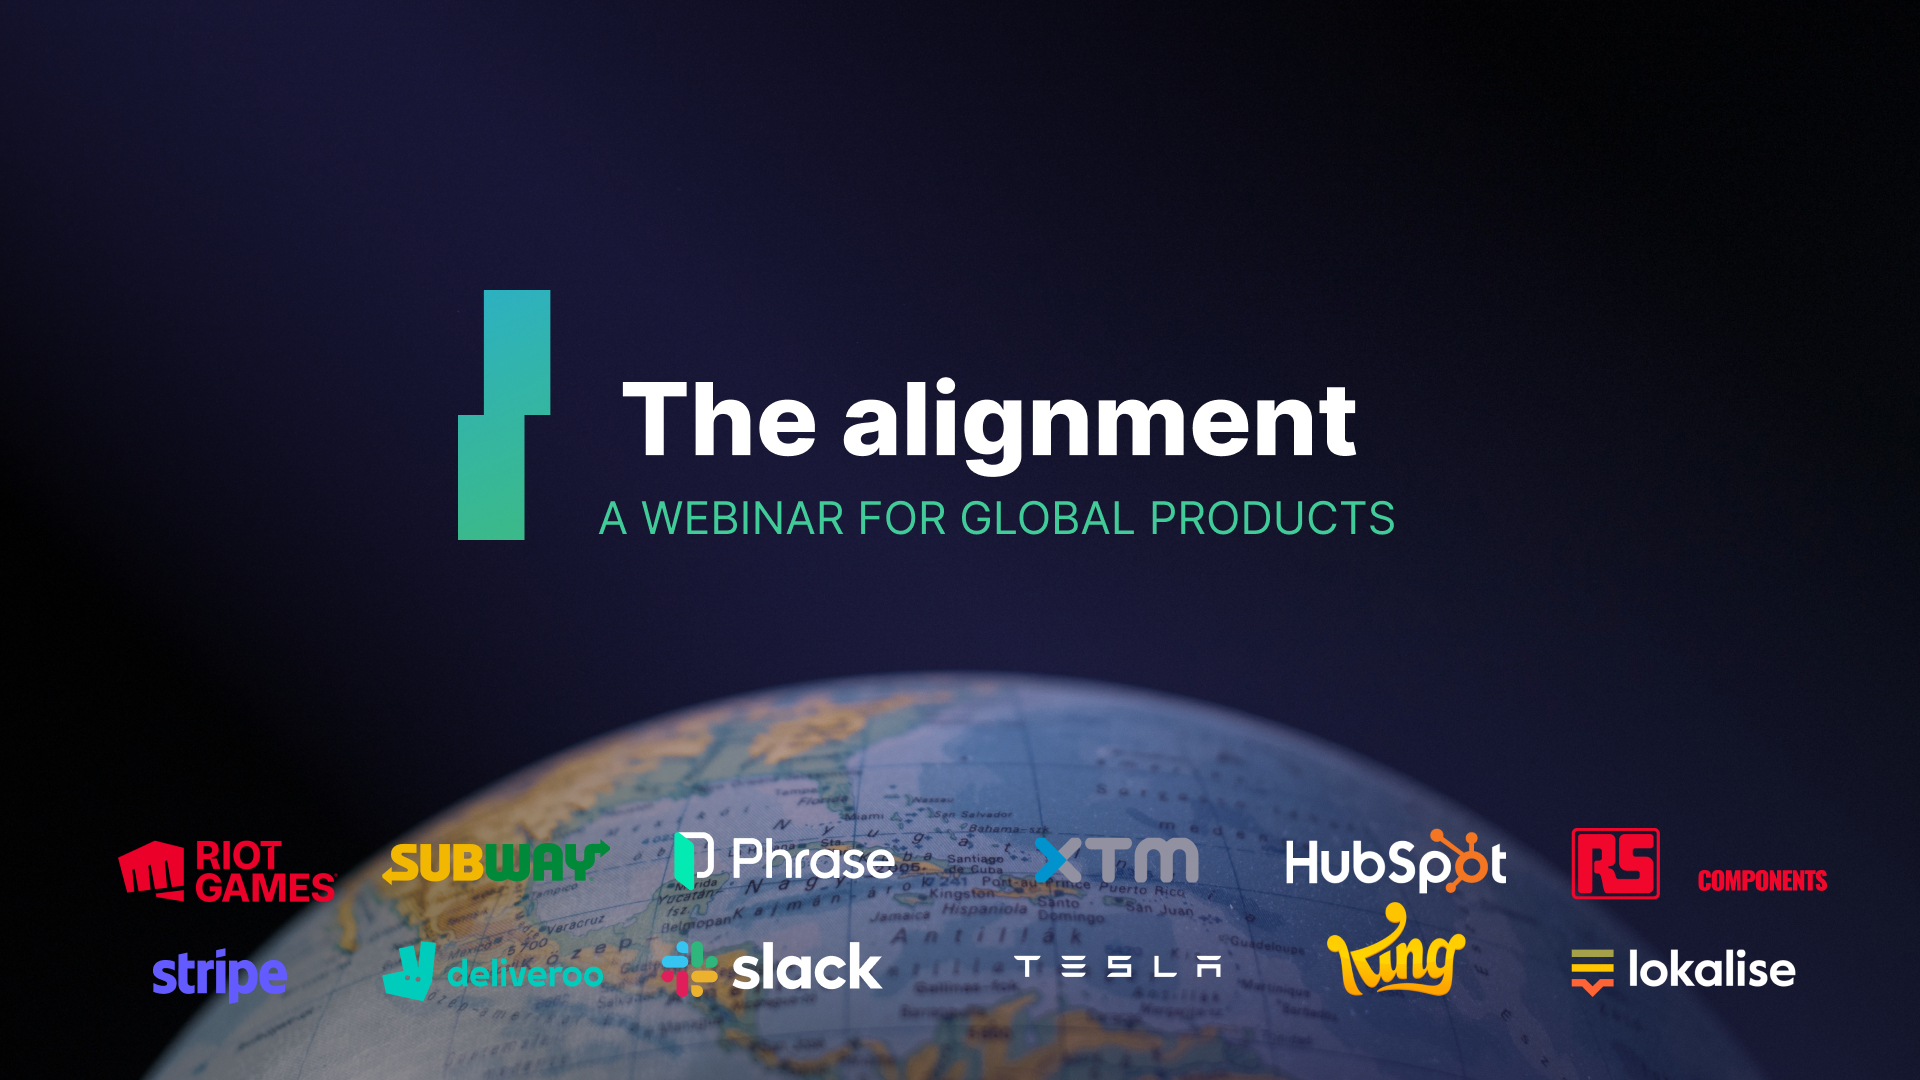 The alignment: head to a webinar in which the world's top product globalization executives align